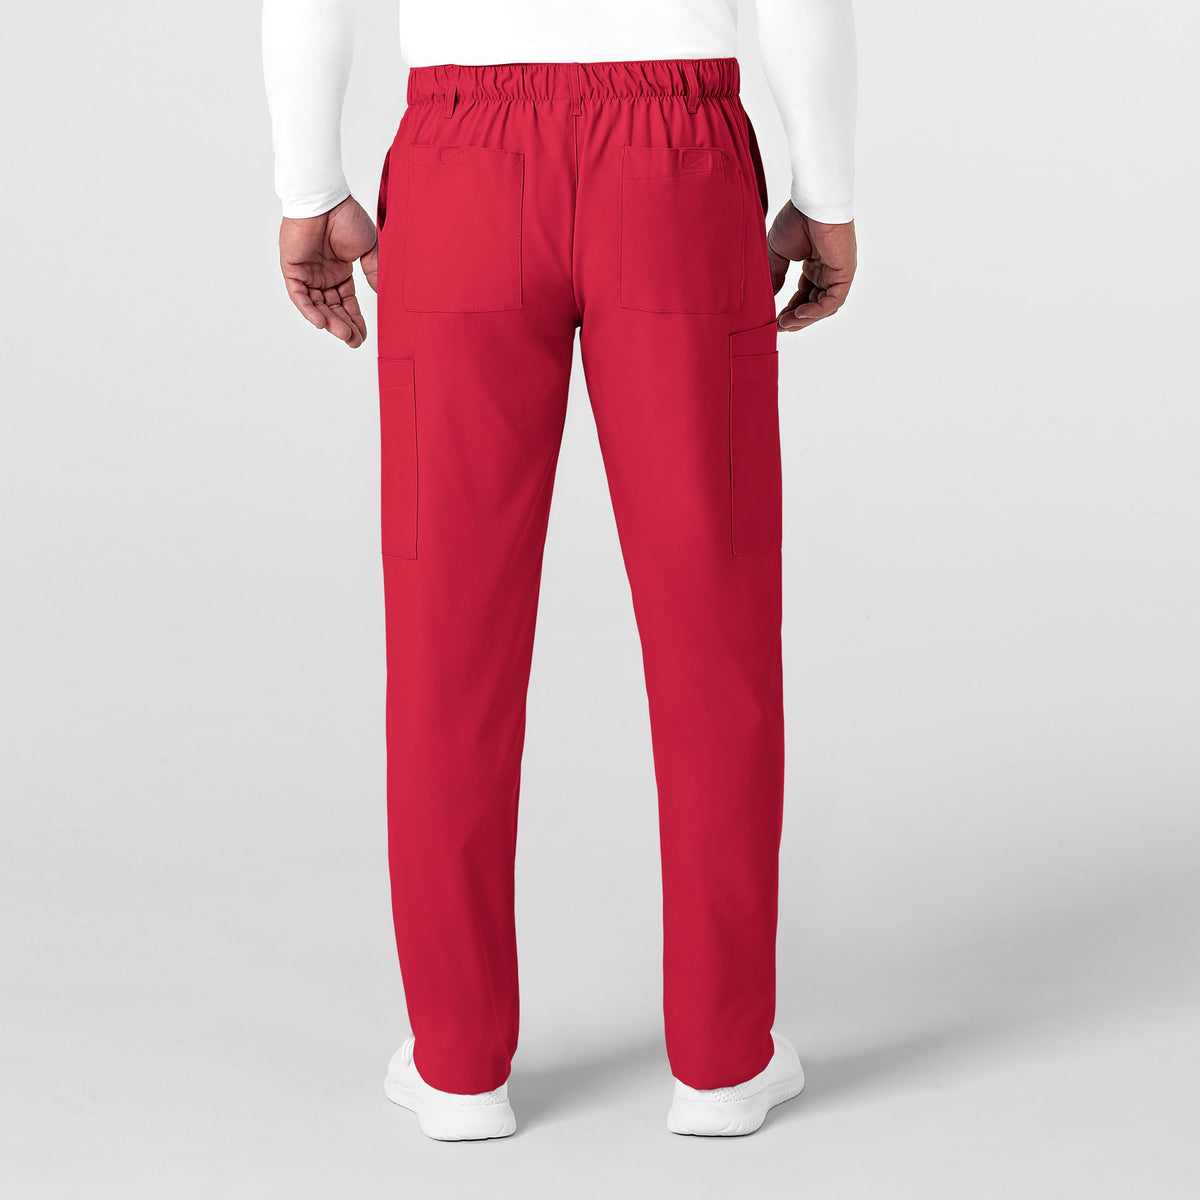 W123 Men's Flat Front Cargo Scrub Pant Red back view